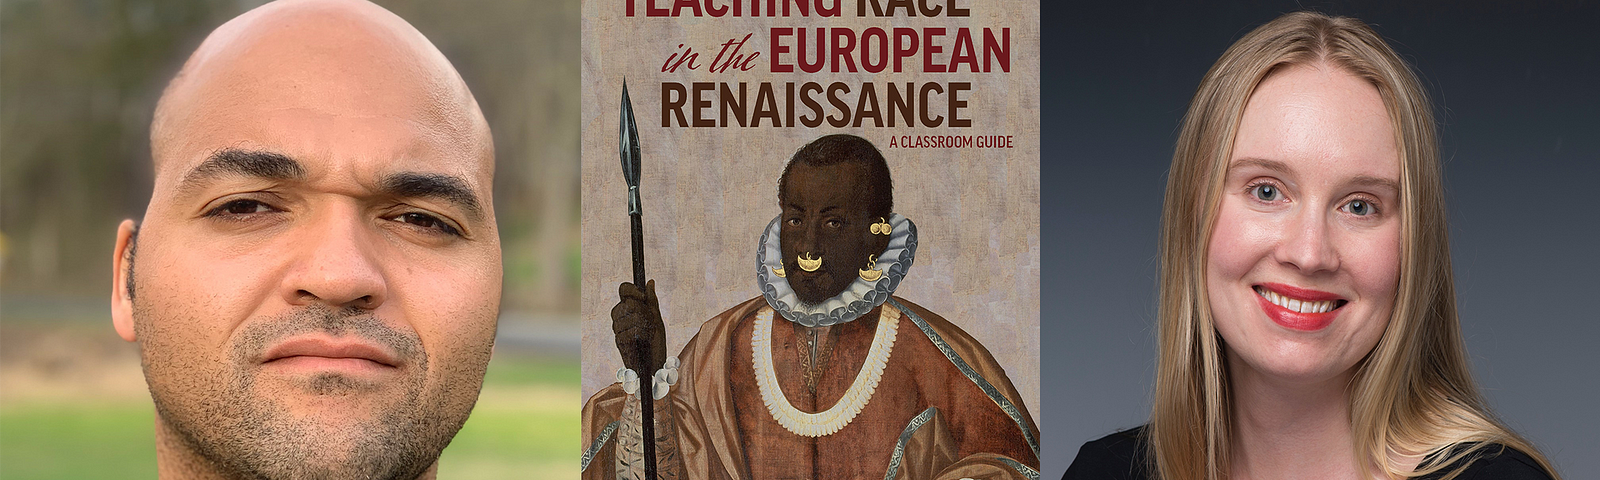 Headshots of Matthieu Chapman and Anna Wainwright next to the cover of “Teaching Race in the European Renaissance”